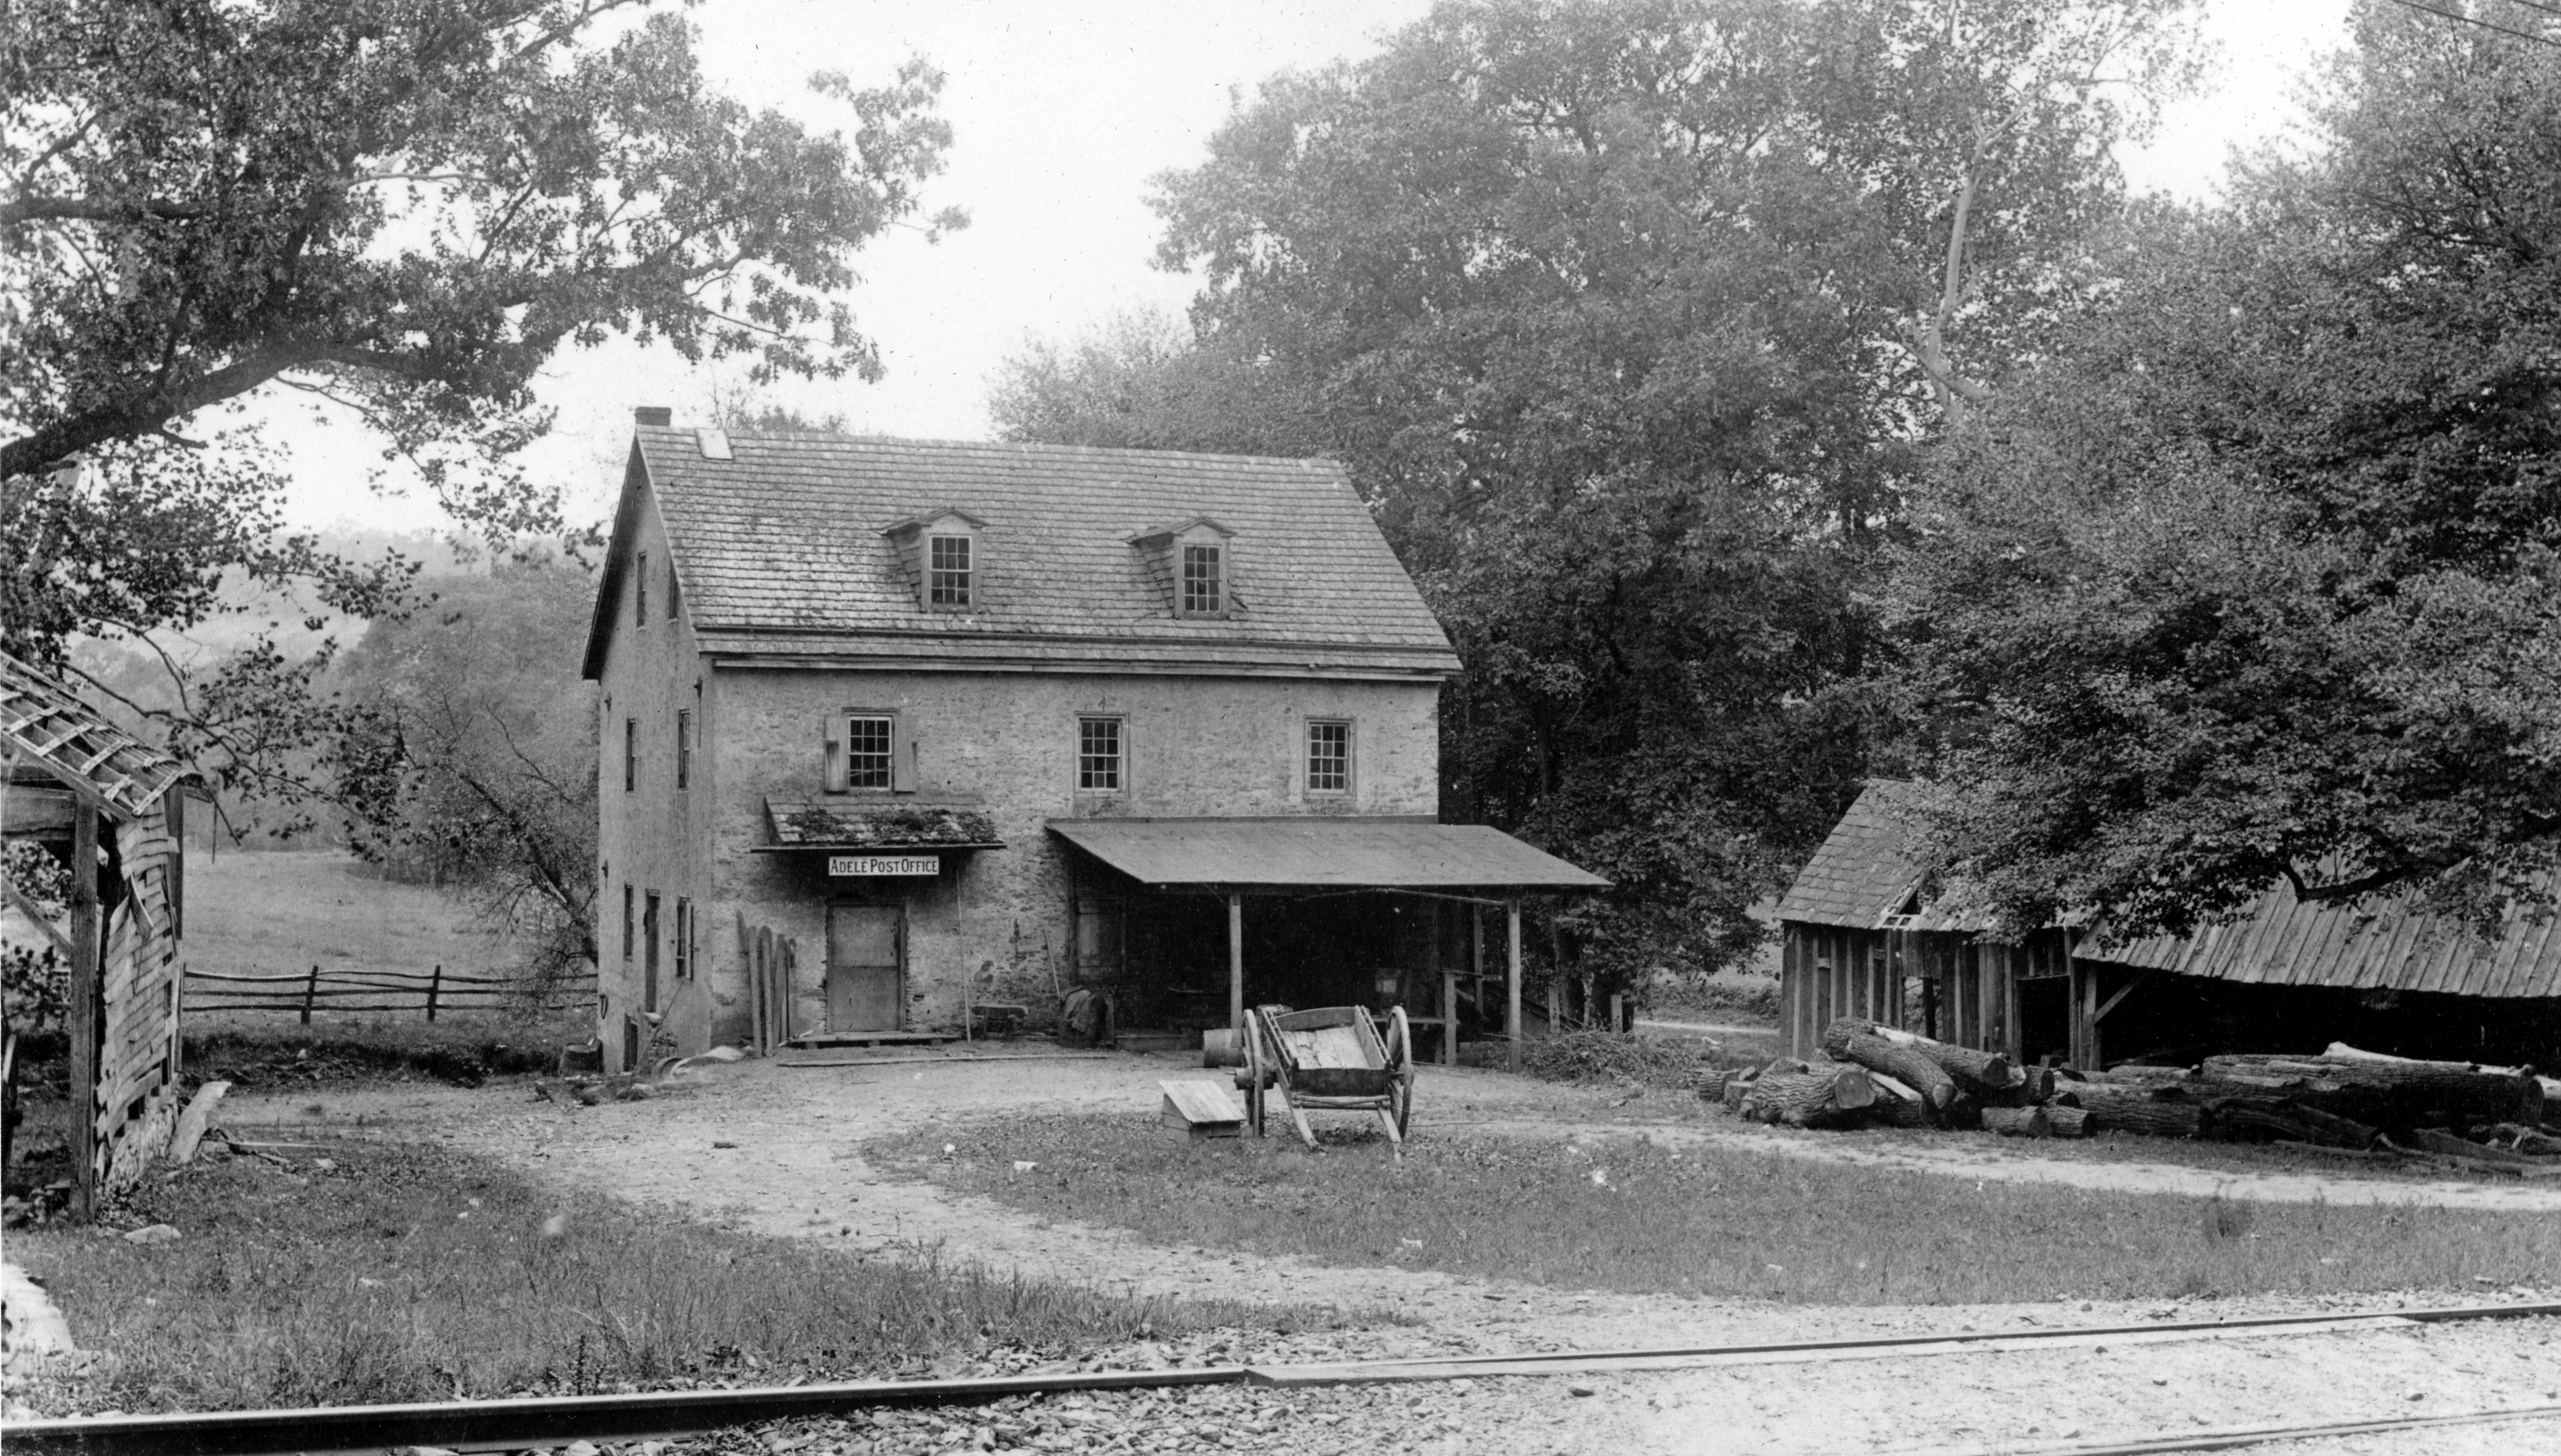 Black and white image of a ca. 1900 rural post office building fronted by railroad tracks.